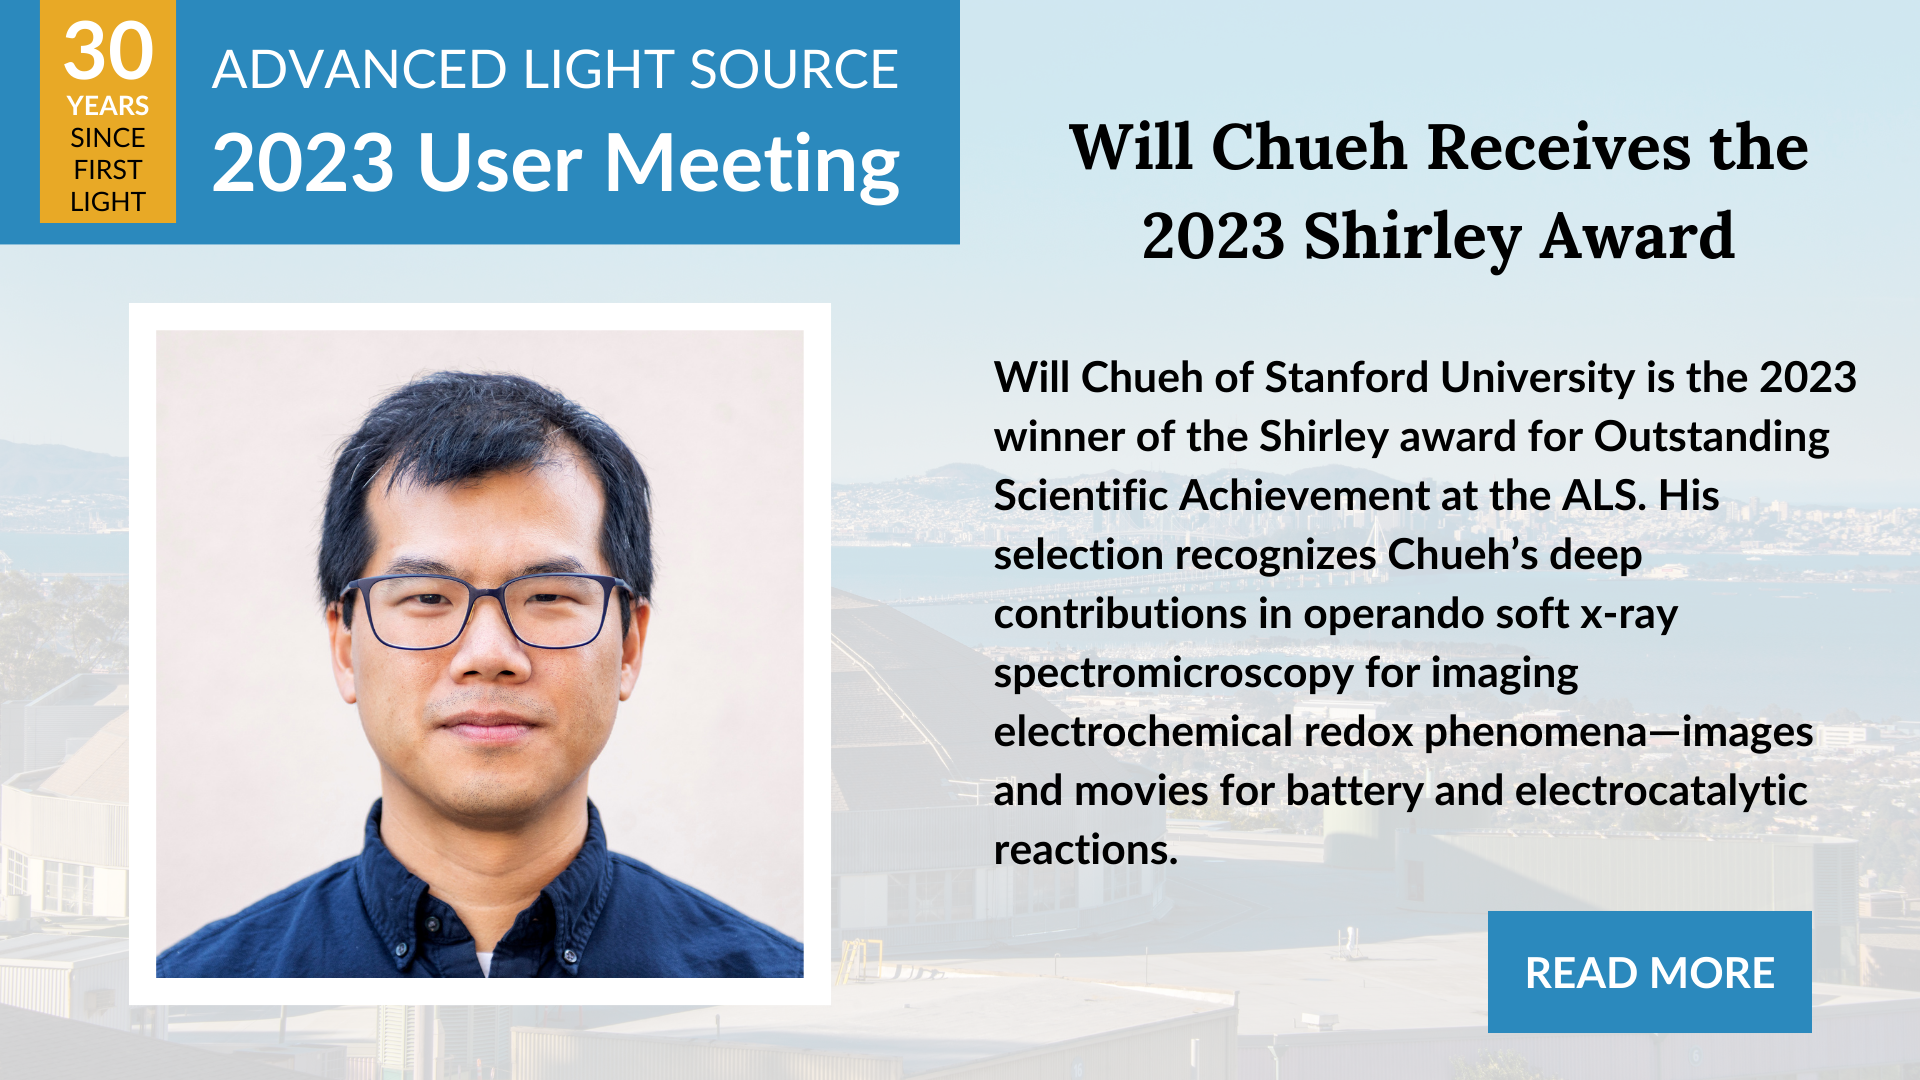 Will Chueh of Stanford University is the 2023 winner of the Shirley award for Outstanding Scientific Achievement at the ALS. His selection recognizes Chueh’s deep contributions in operando soft x-ray spectromicroscopy for imaging electrochemical redox phenomena—images and movies for battery and electrocatalytic reactions.